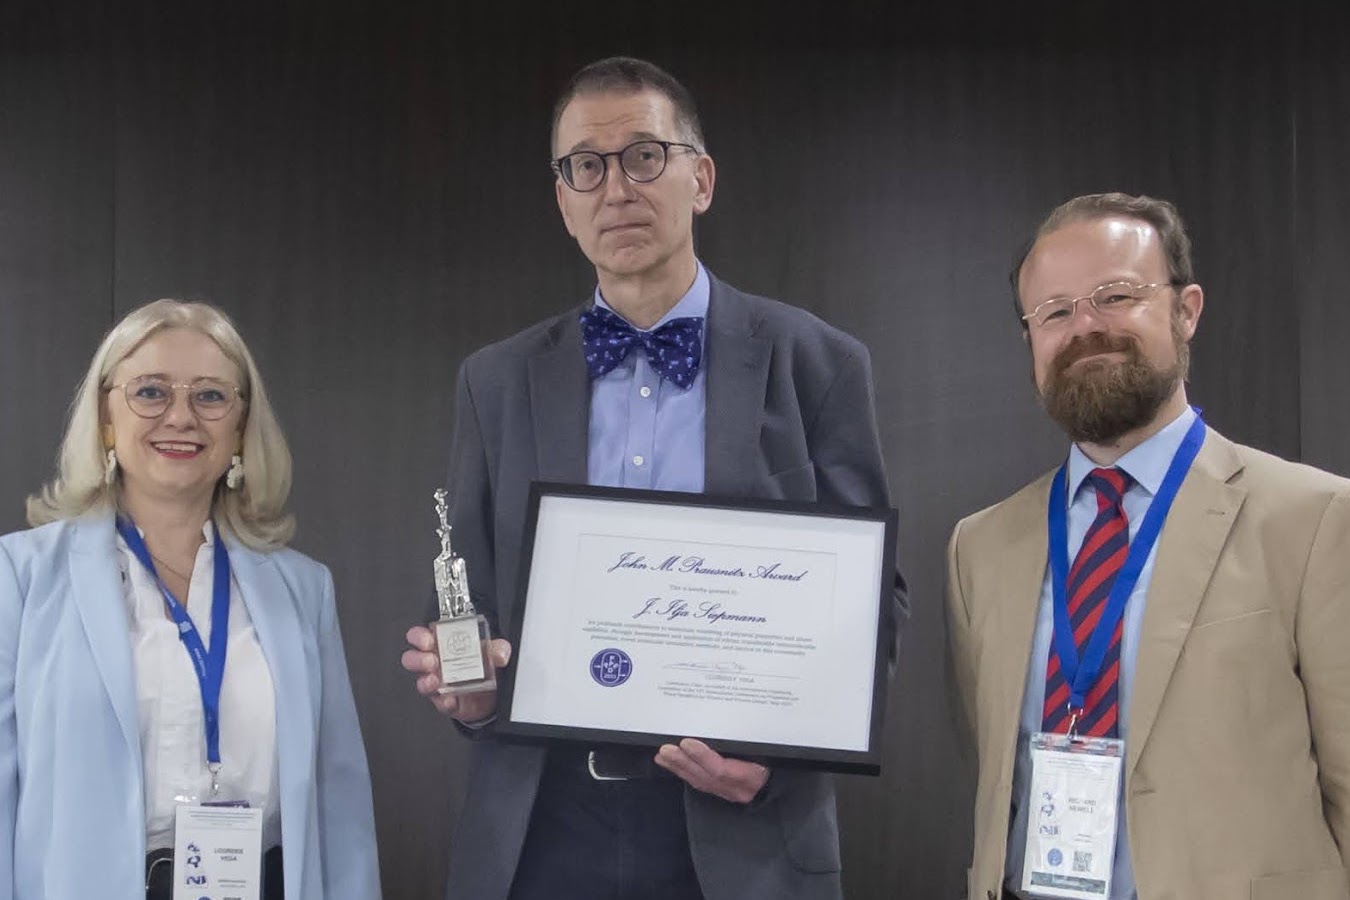 Prof. Siepmann standing with an award certificate next to two other individuals.